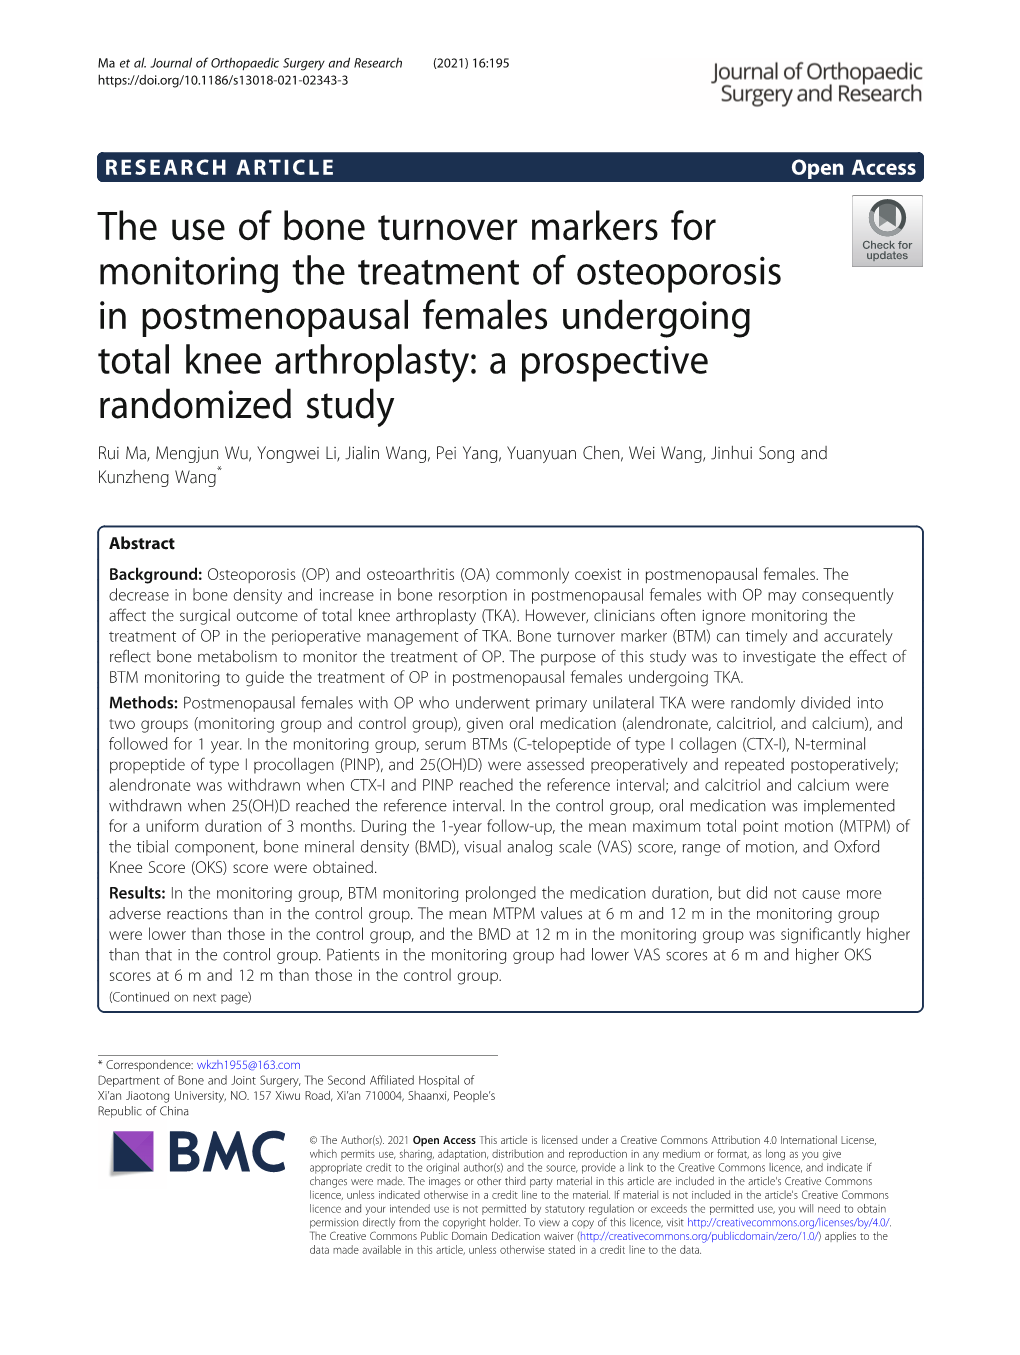 The Use of Bone Turnover Markers for Monitoring the Treatment Of